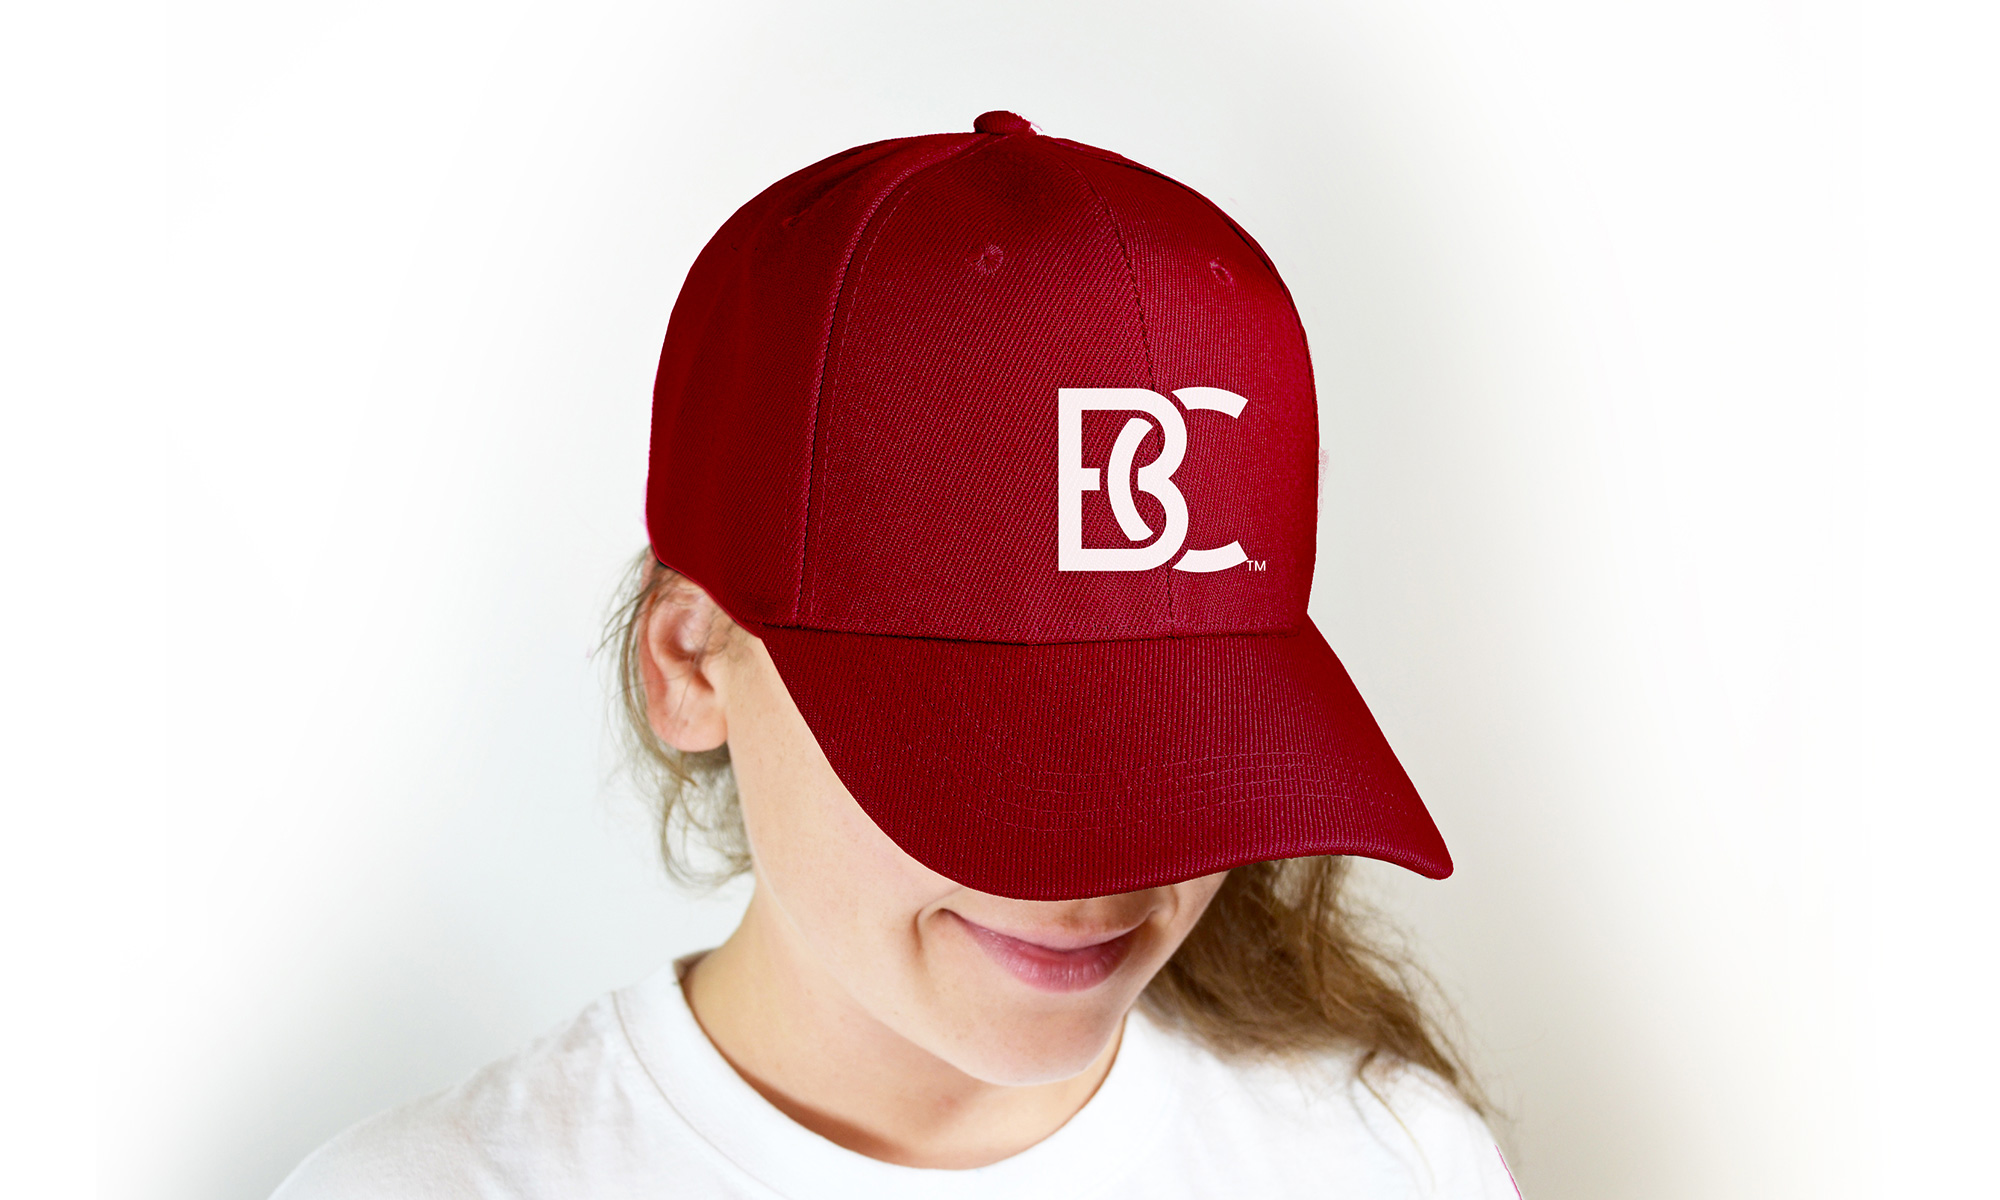 A hat with the new logo.